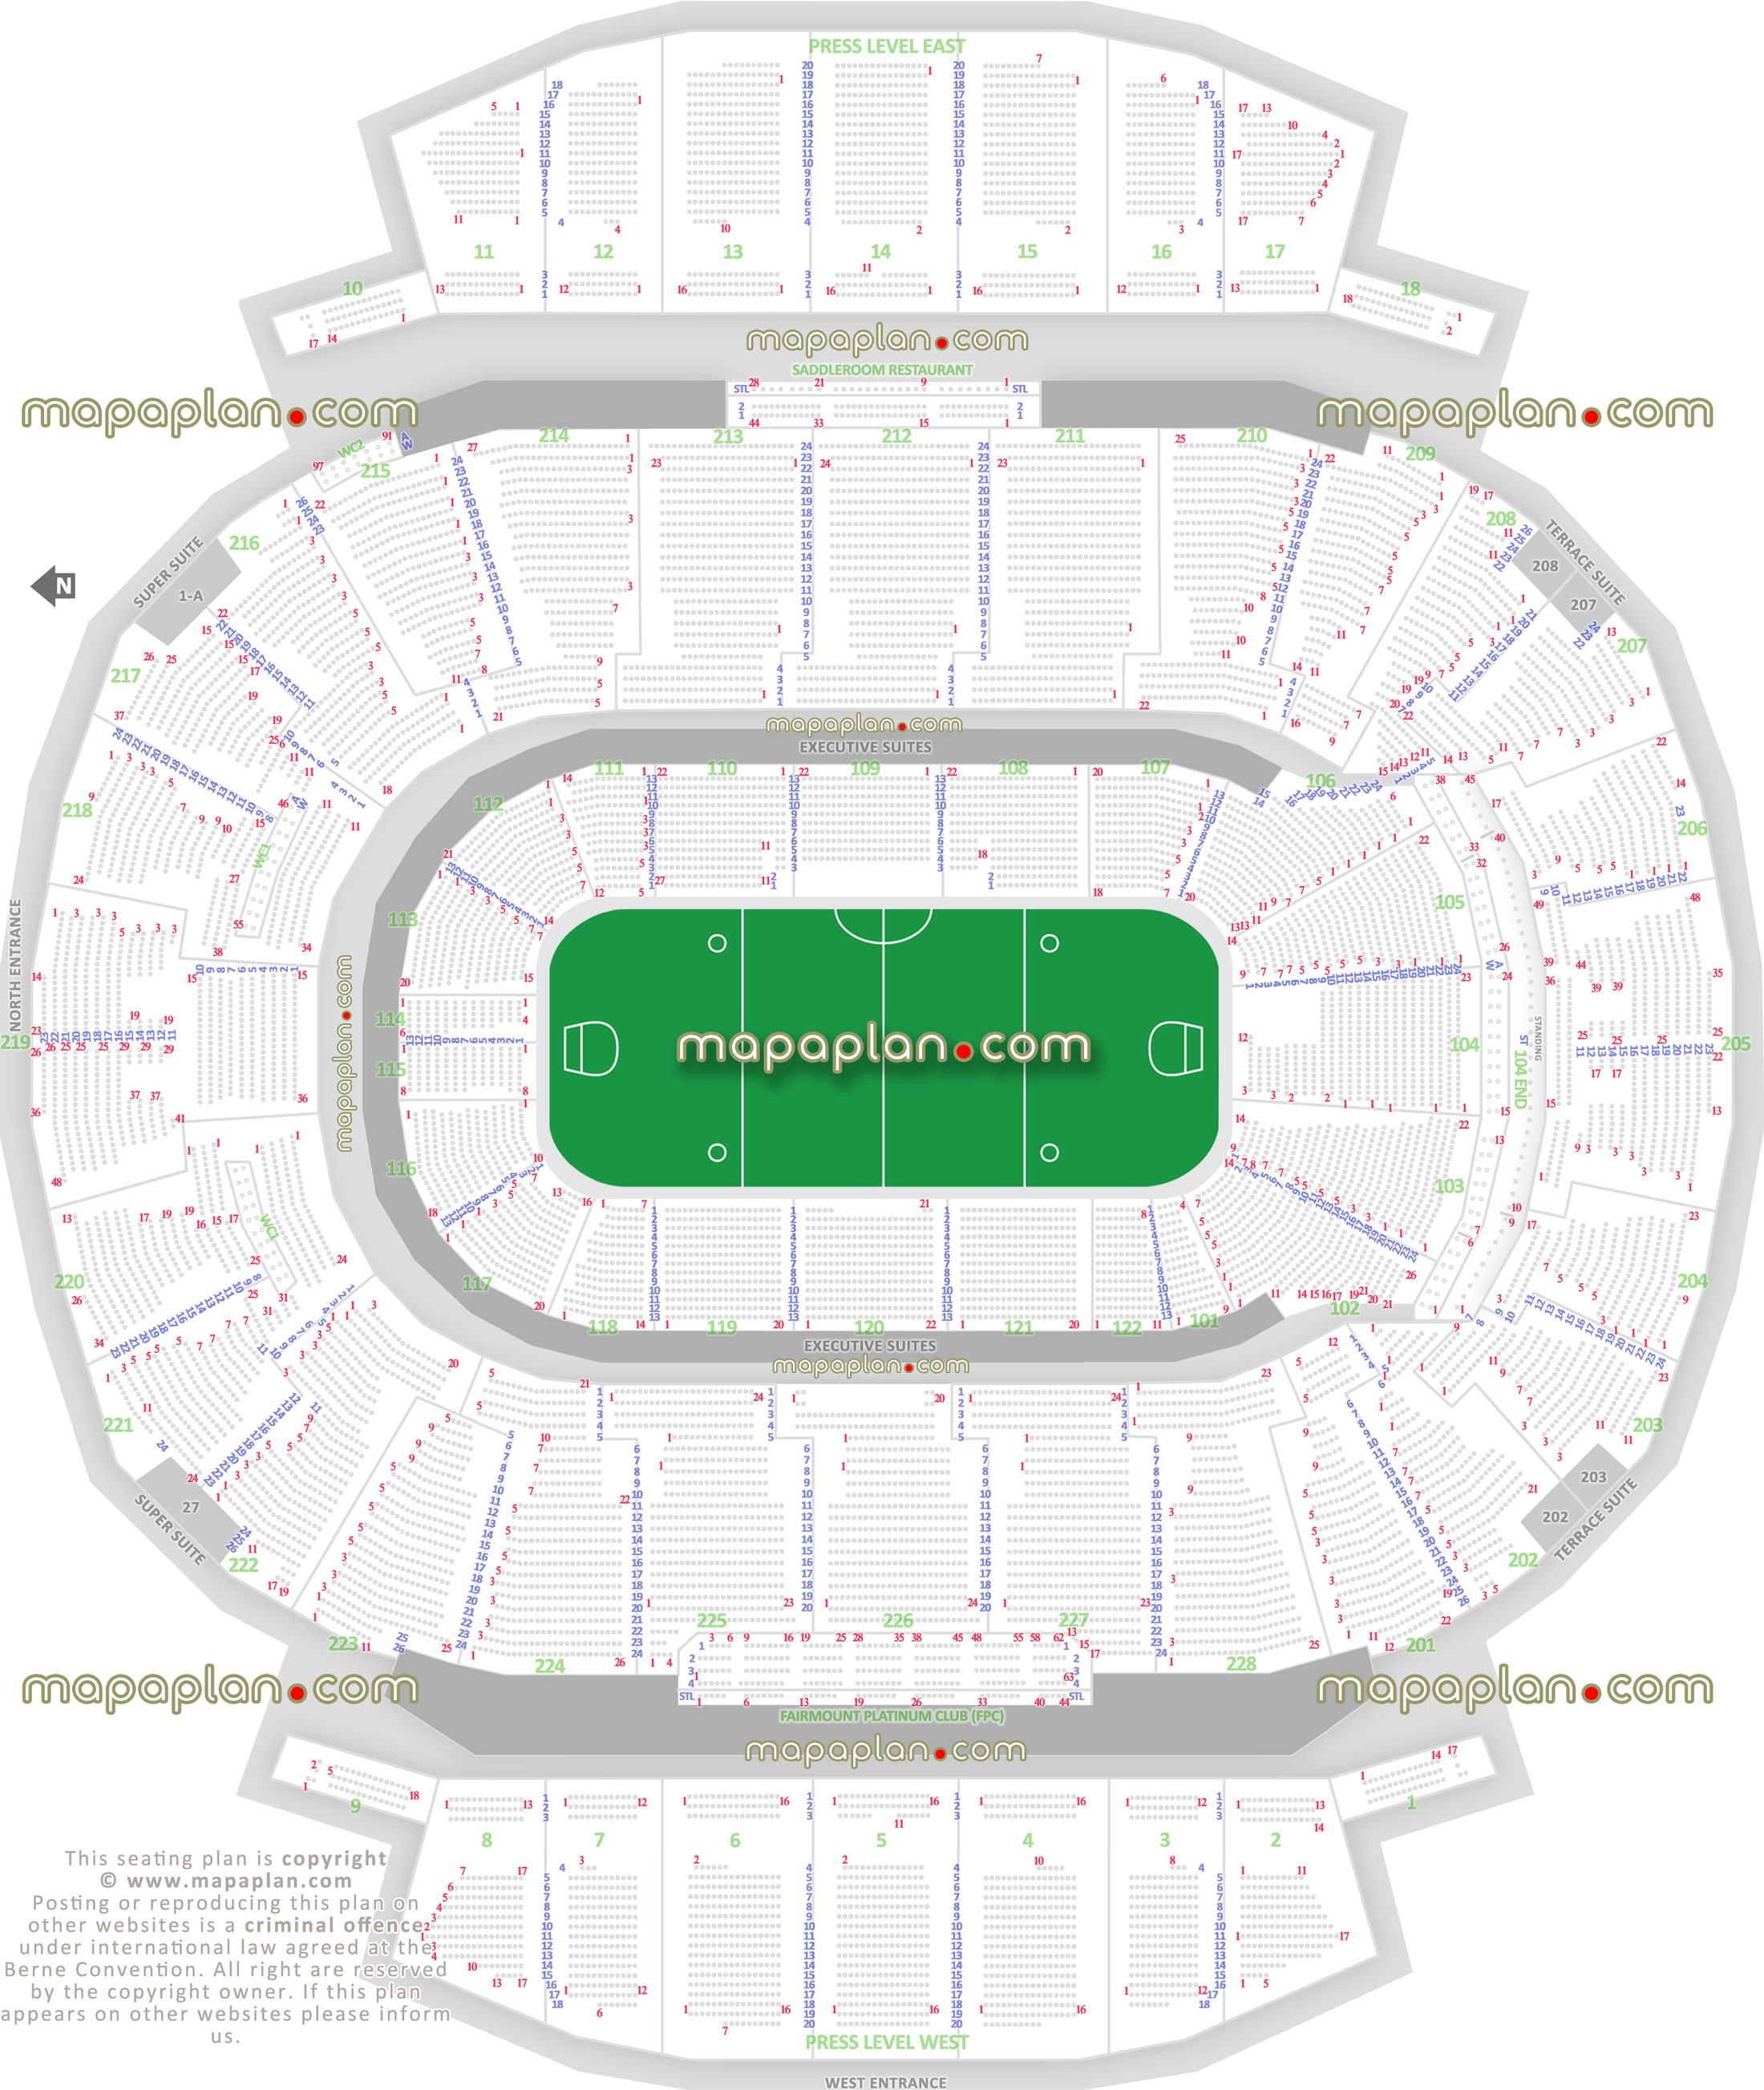 calgary roughnecks lacrosse detailed seating plan plan des places plan de salle press level east west saddleroom restaurant iconic fairmount platinum ipc fpc club executive terrace suites wc handicapped standing room only sro rows Calgary Scotiabank Saddledome seating chart